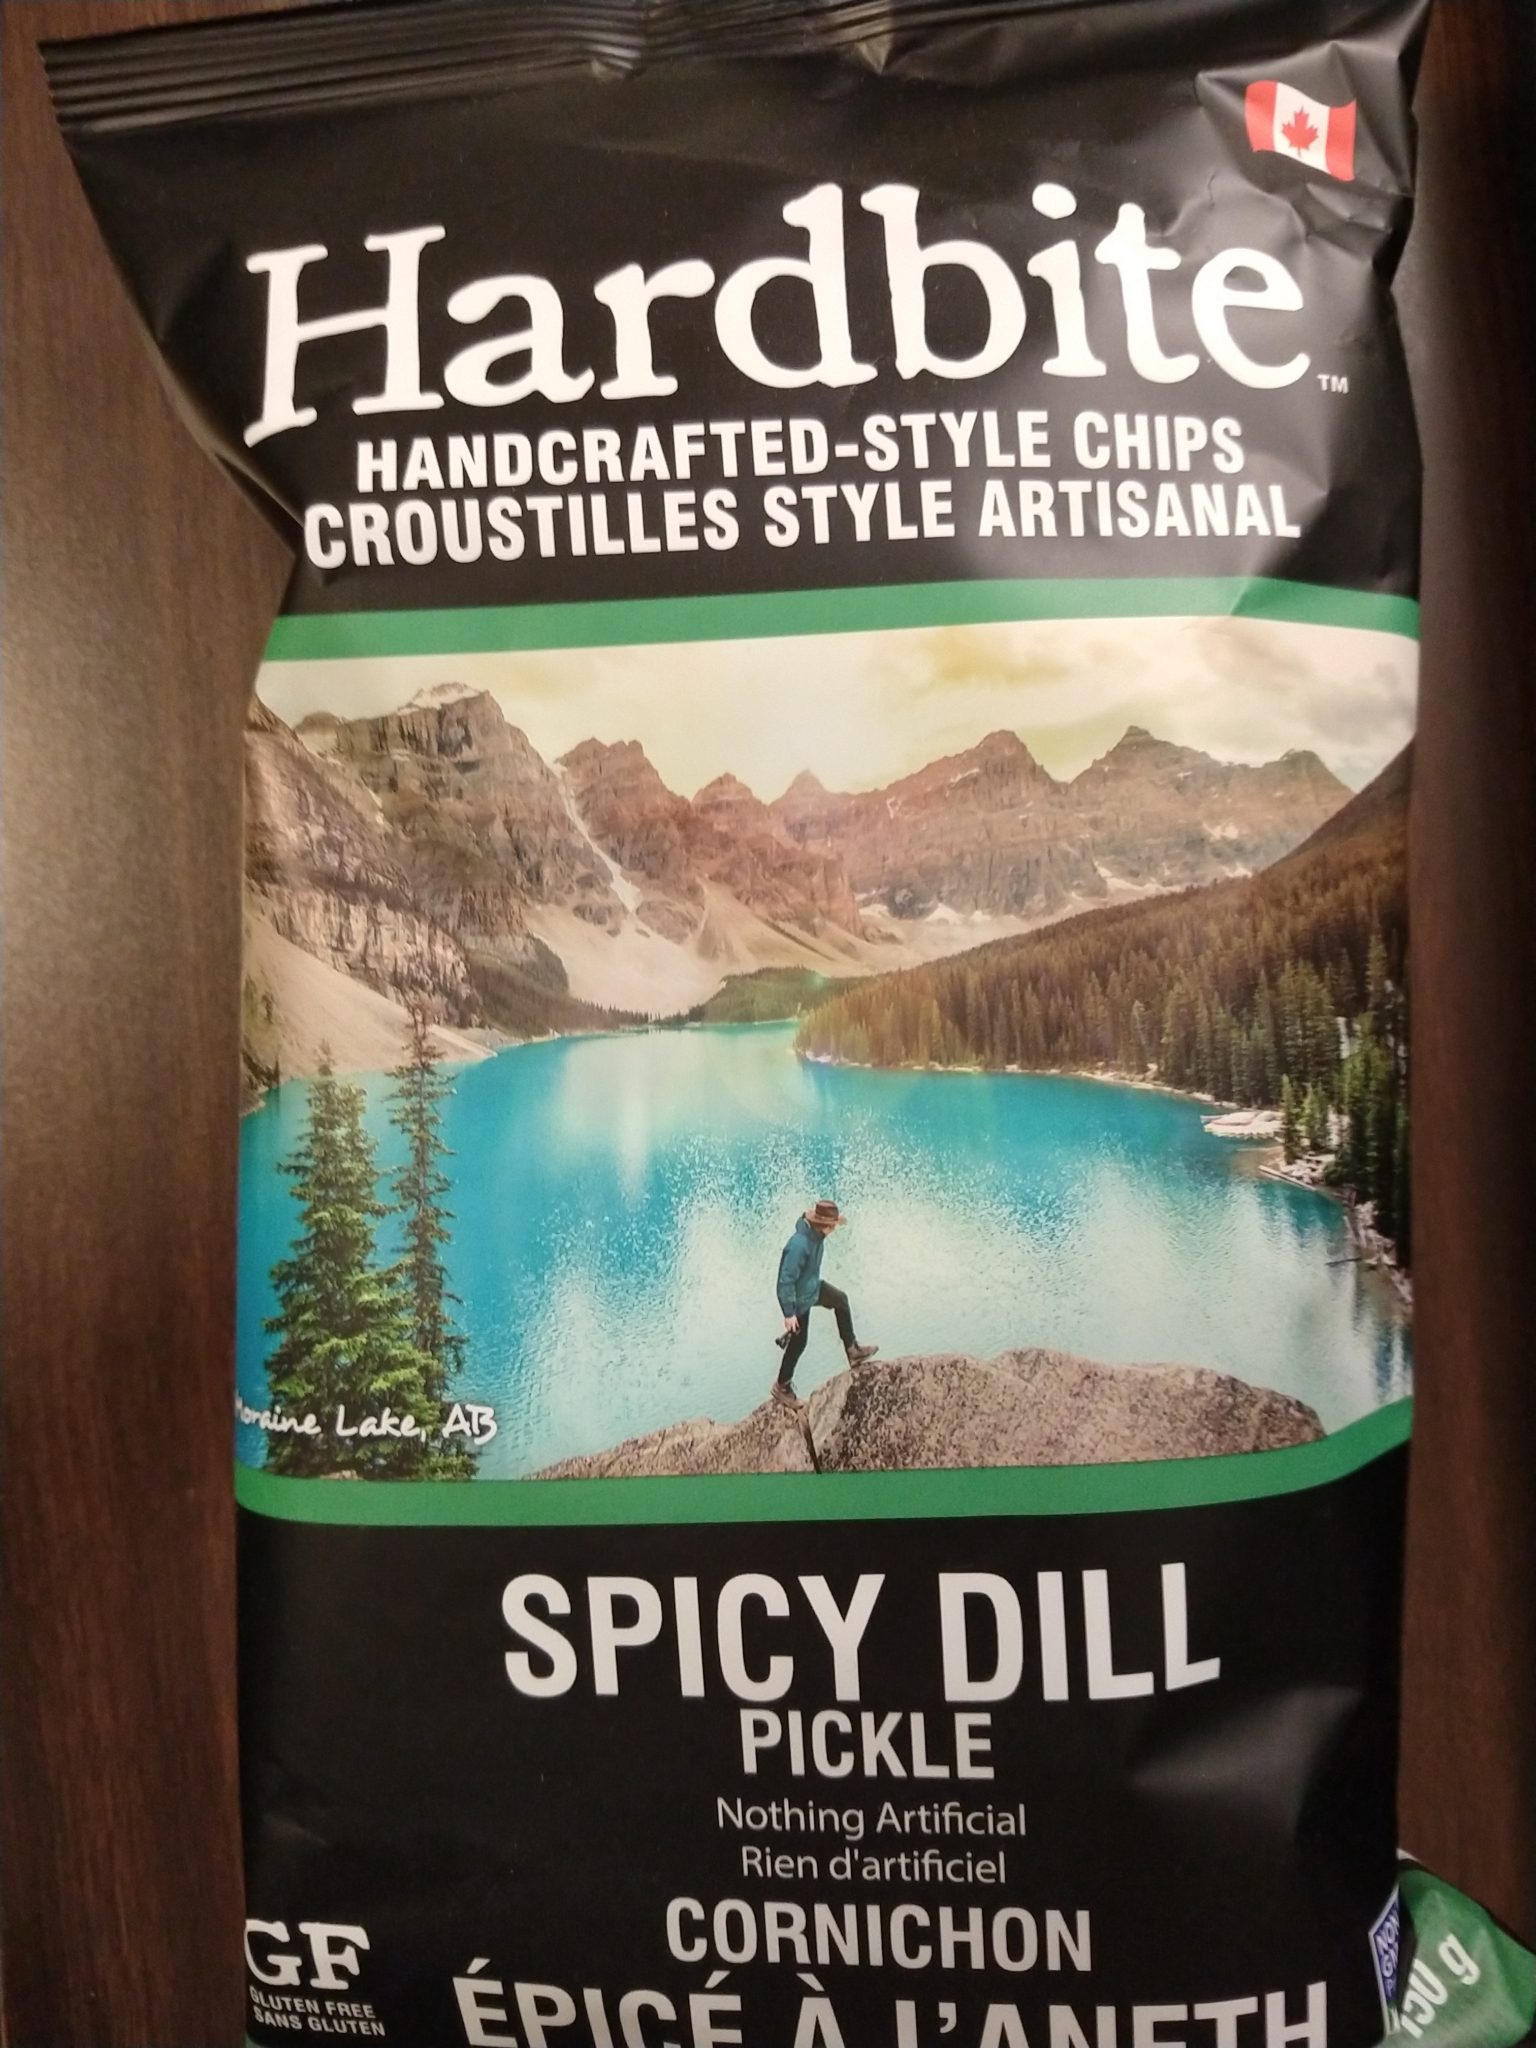 Hardbite – Spicy Dill Pickle